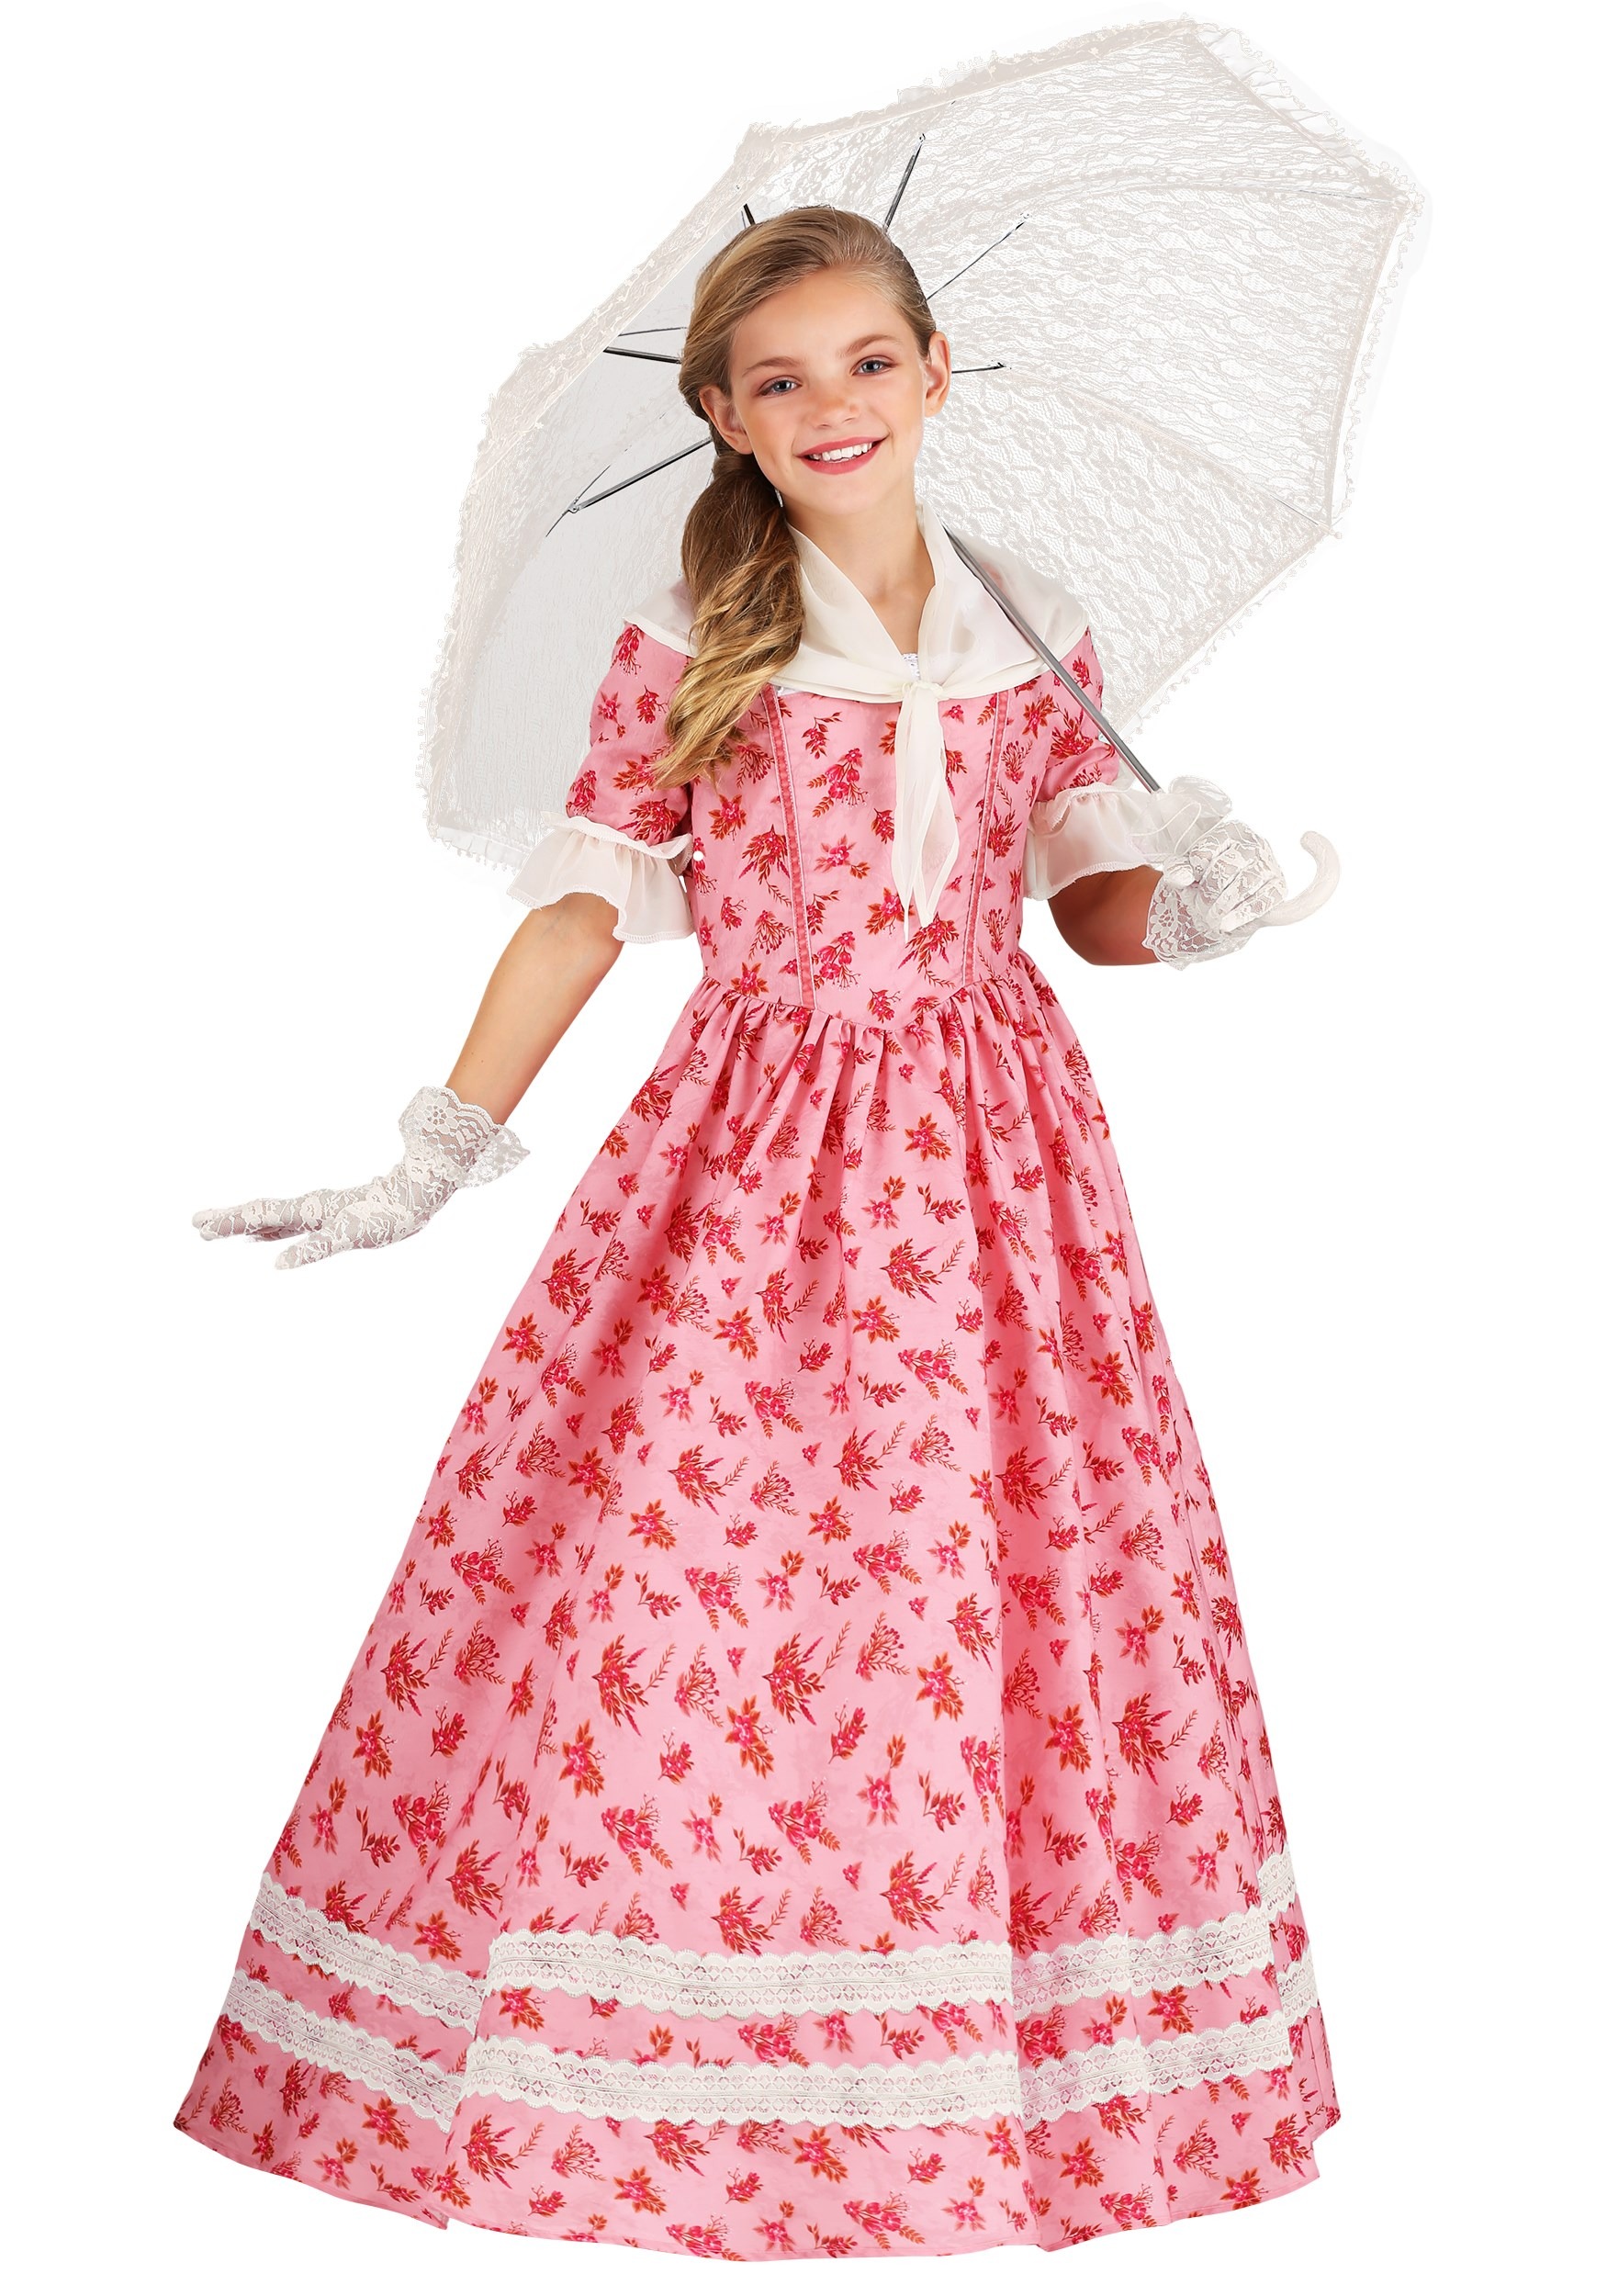 Kid’s Lovely Southern Belle Costume